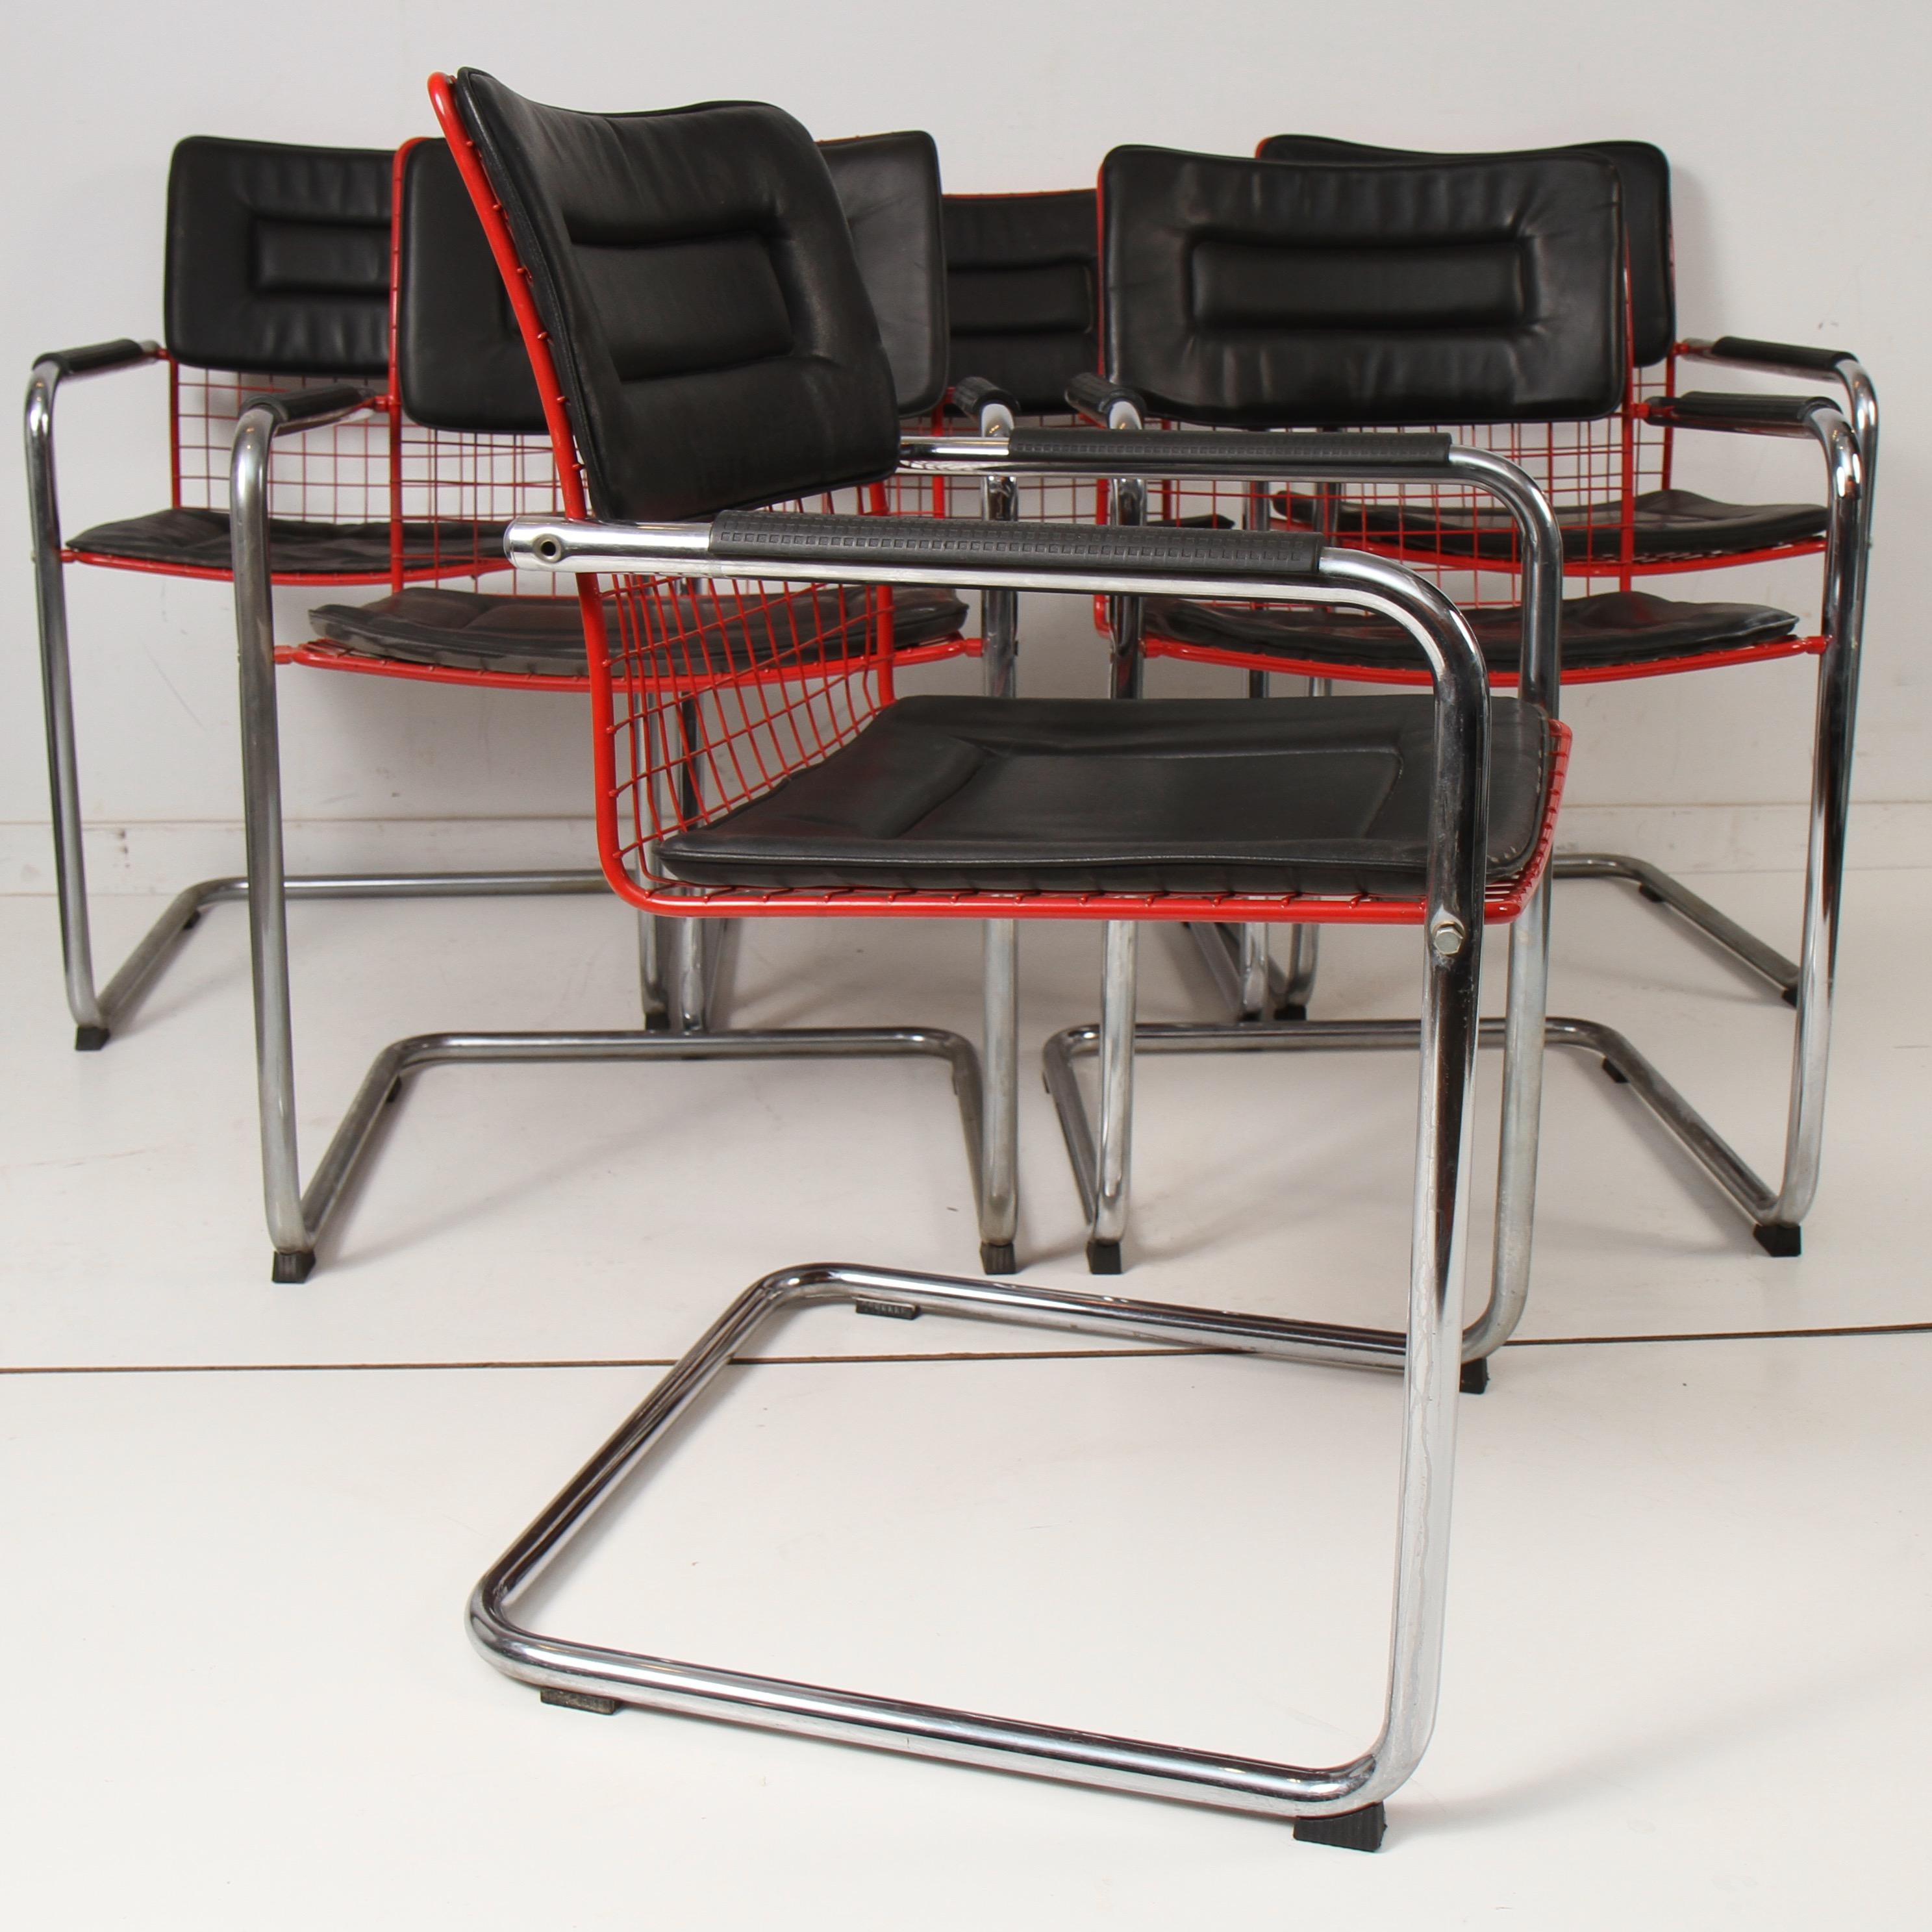 Clean set of 6 chairs with Naugahyde snap on cushions and red powder-coated wire seats with chrome arms and cantilevered legs. Very much in the style of Italian furniture maker TMU.